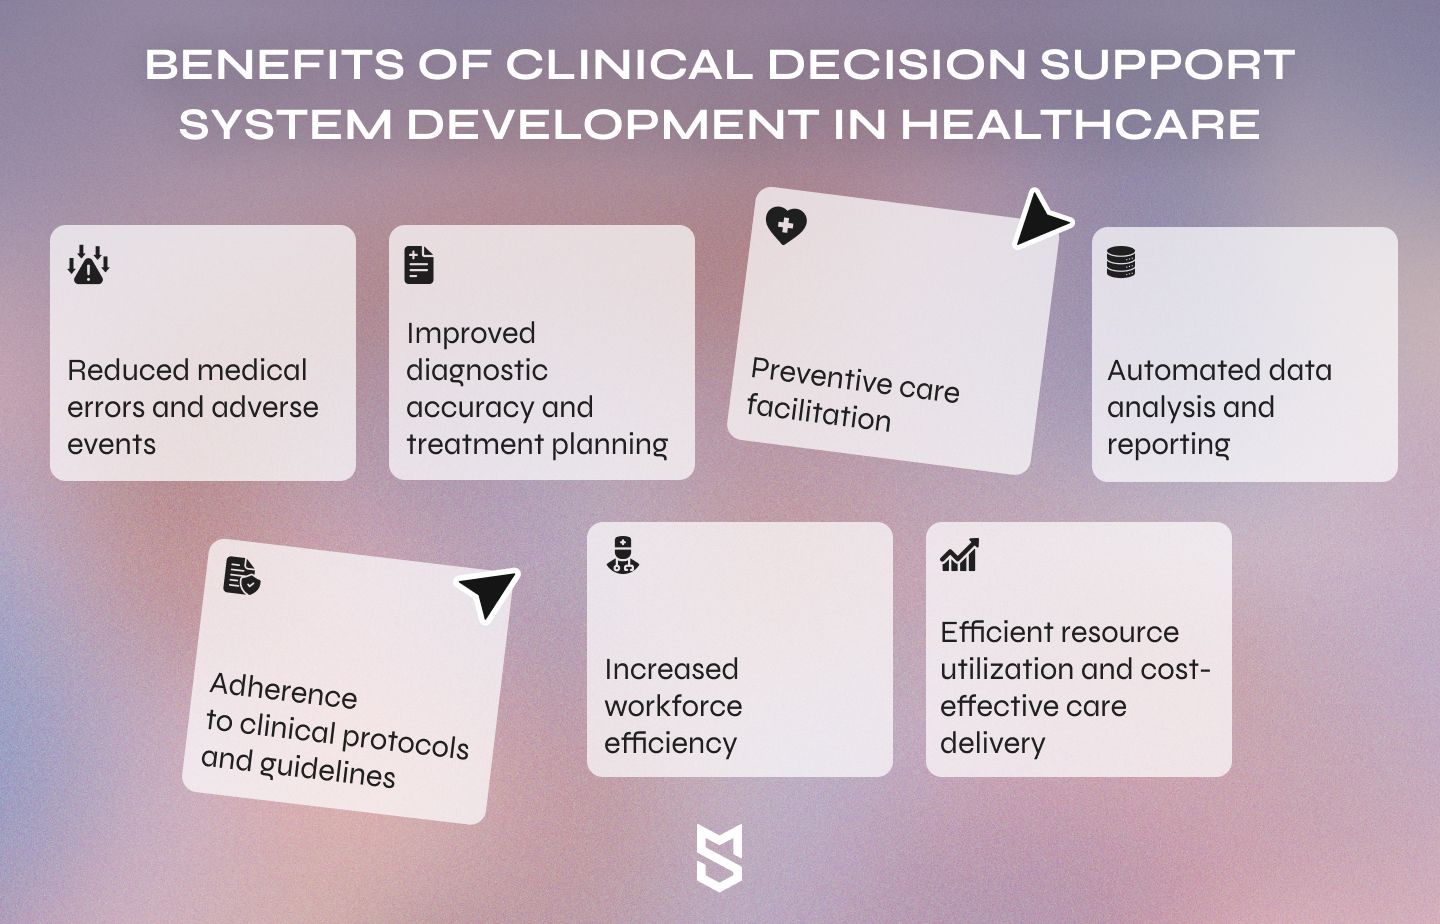 Benefits of clinical decision support system development in healthcare